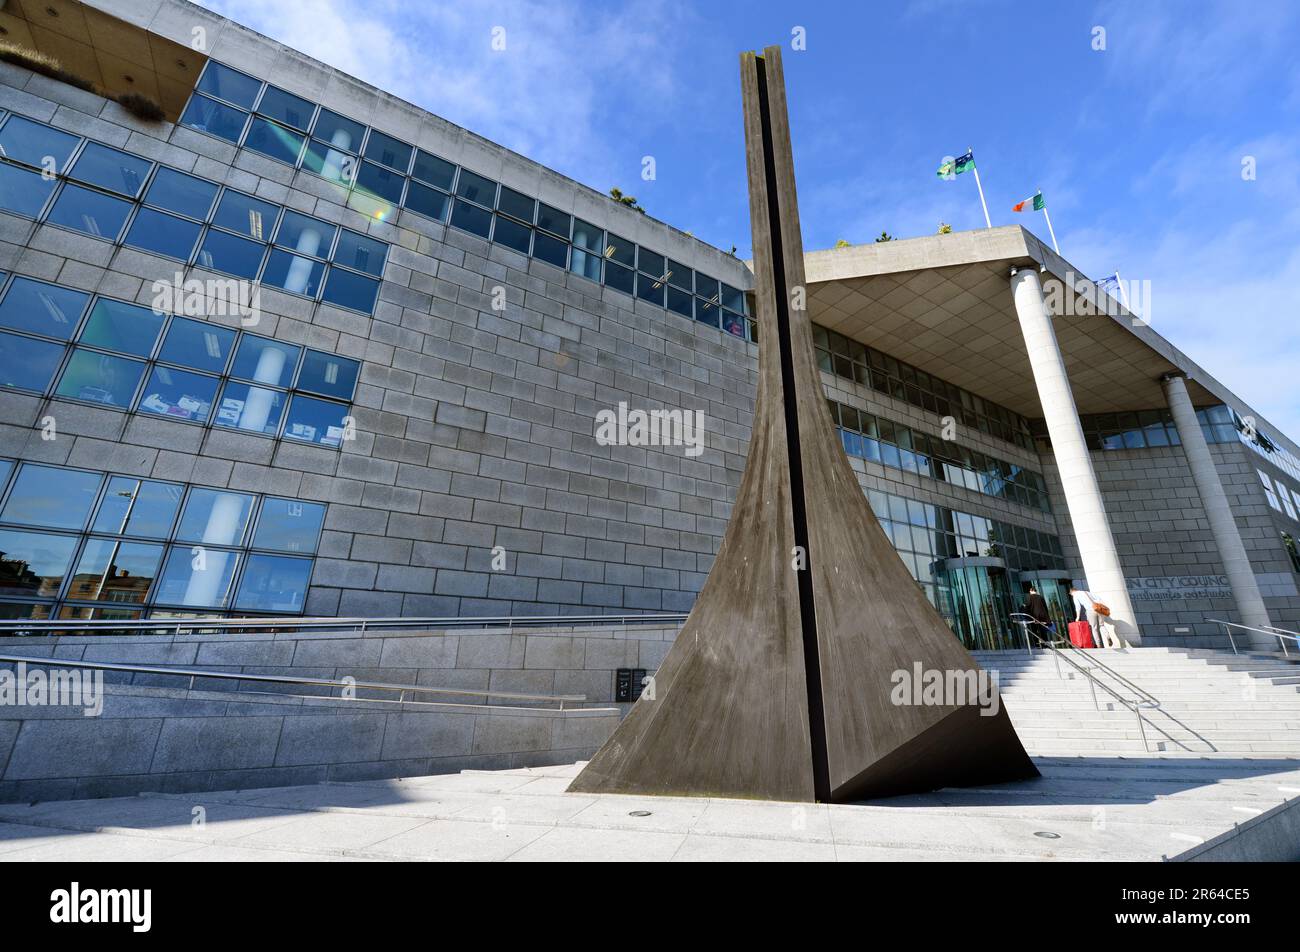 Wooden Sculpture 'Wood Quay' by Michael Warren outside the offices of Dublin City Council. Dublin, Ireland. Stock Photo